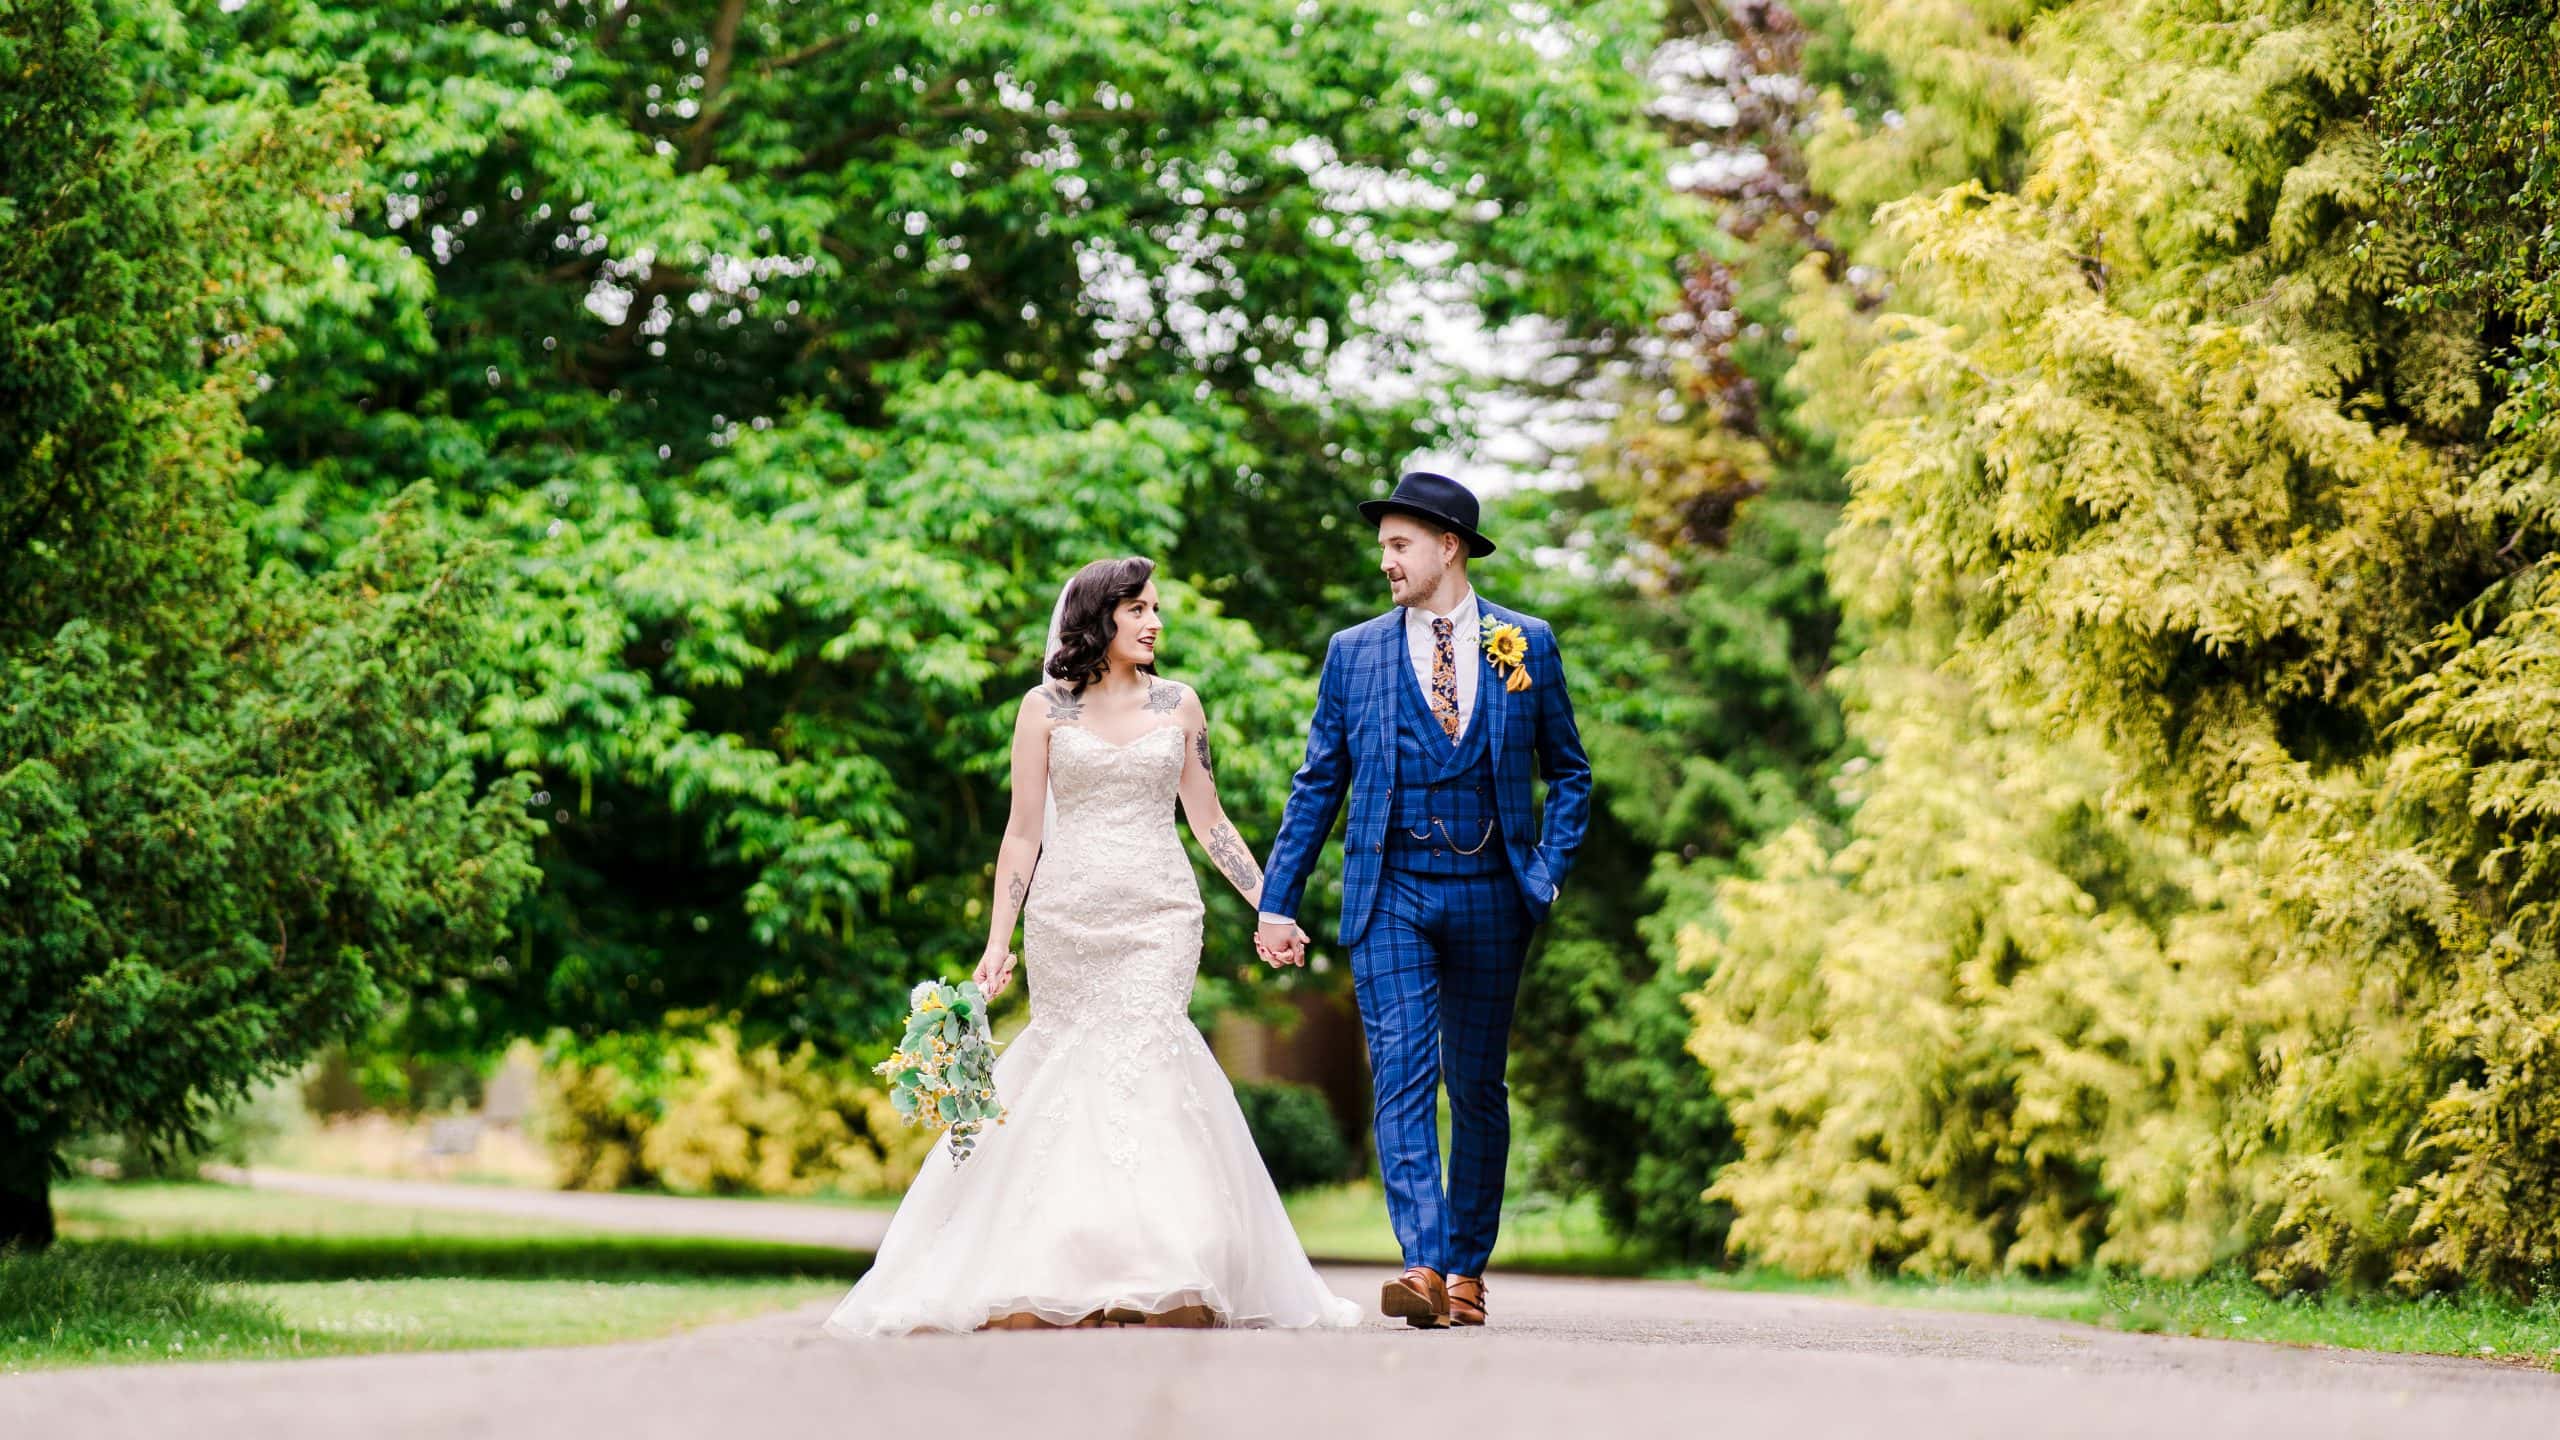 A gorgeous newlywed couple walk through Pittville Park. The bride is in a gorgeous, traditional white dress with an elegant bouquet of sunflowers. The groom is wearing a blue chequered three piece suit, matched with a bowler hat.